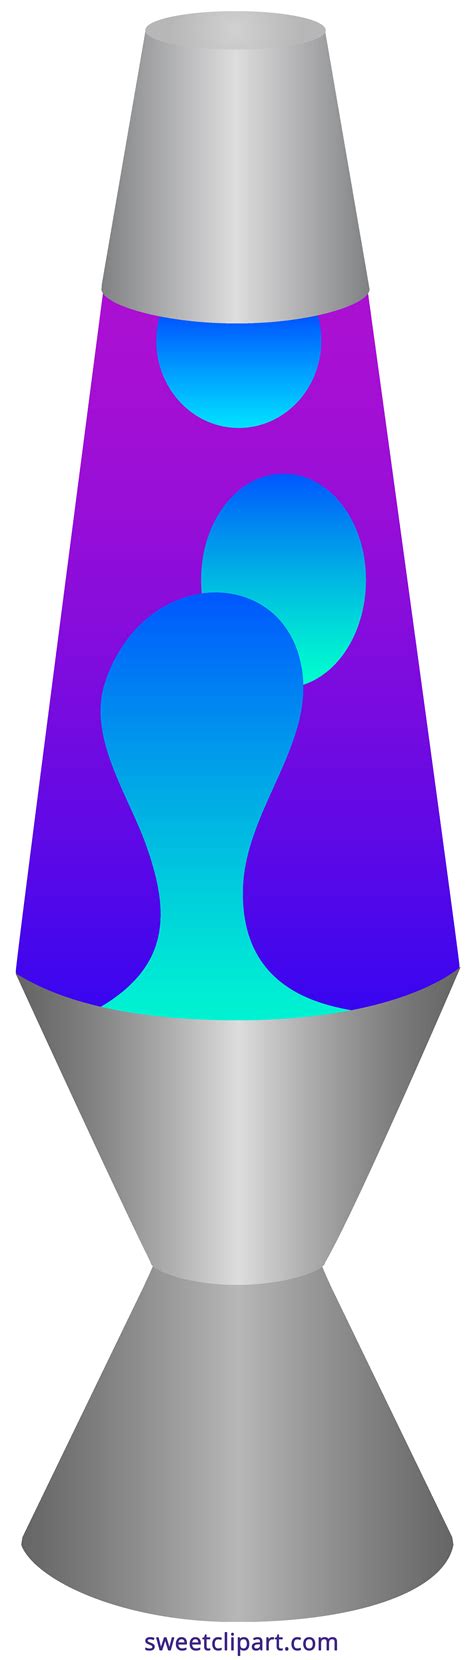 Lamp clipart lava lamp, Lamp lava lamp Transparent FREE for download on png image